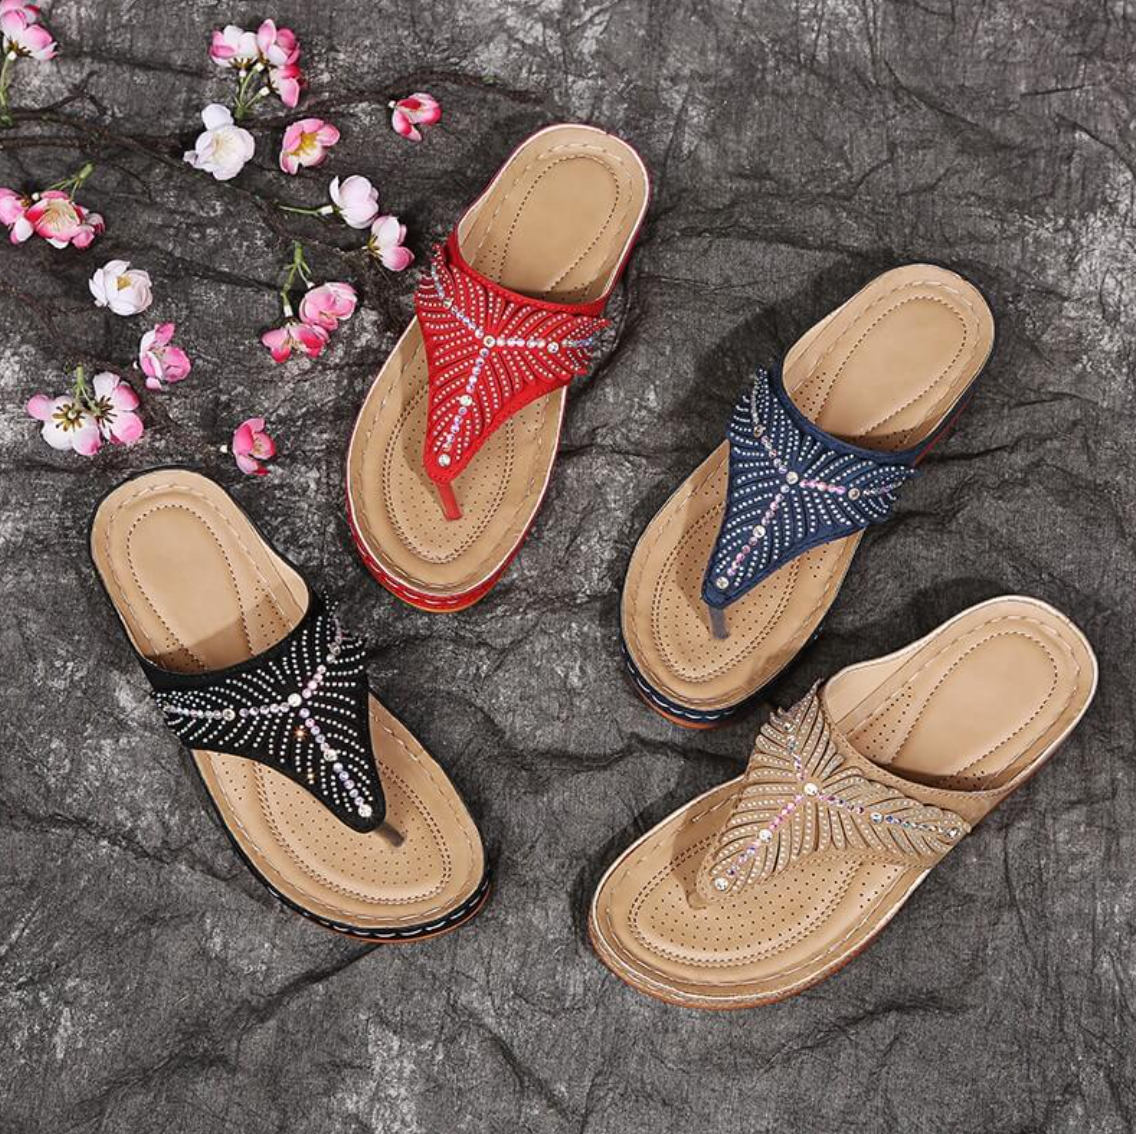 🔥On This Week Sale OFF 70%🔥2023 Women Casual Sandals, Crystal Rome Fashion Clip Toe Slippers